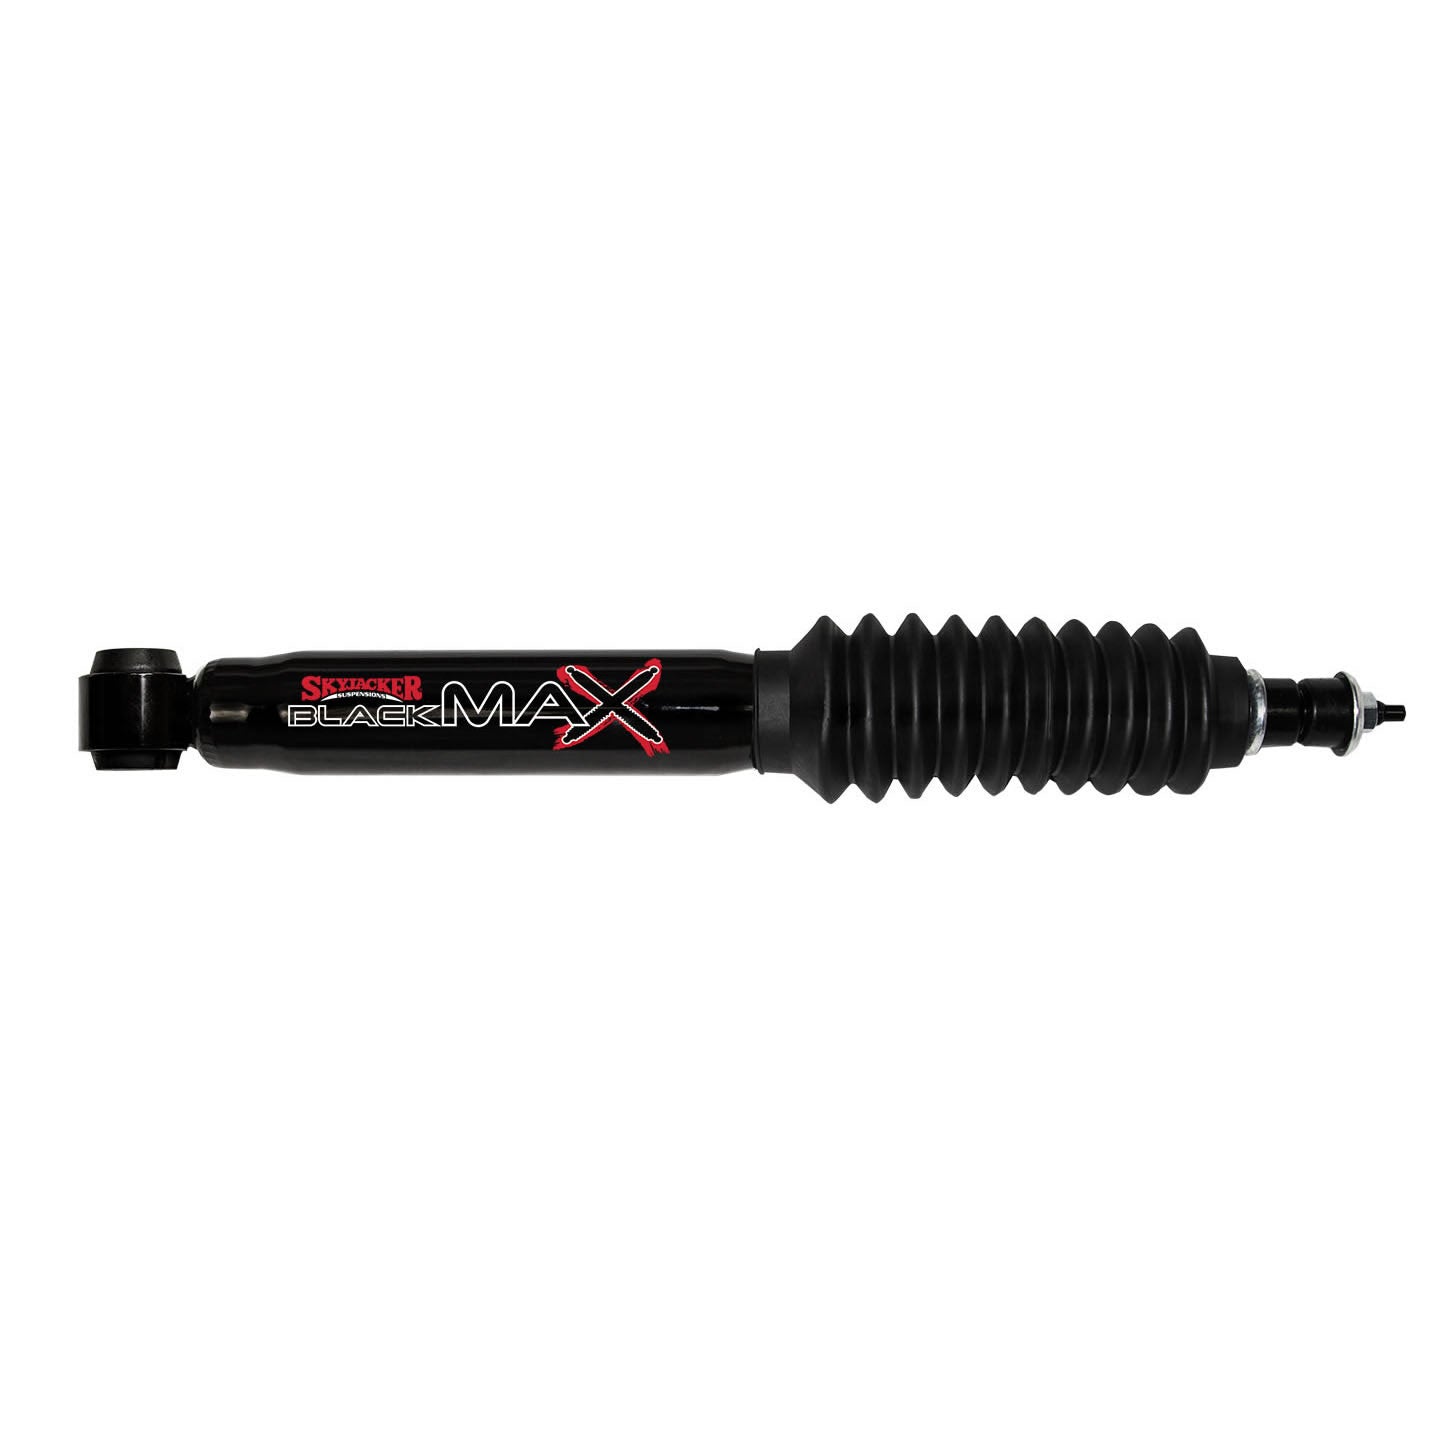 Steering Stabilizer Black  Extended Length 17.06 Inch Collapsed Length 10.48 Inch Replacement Cylinder Only No Hardware Included Skyjacker